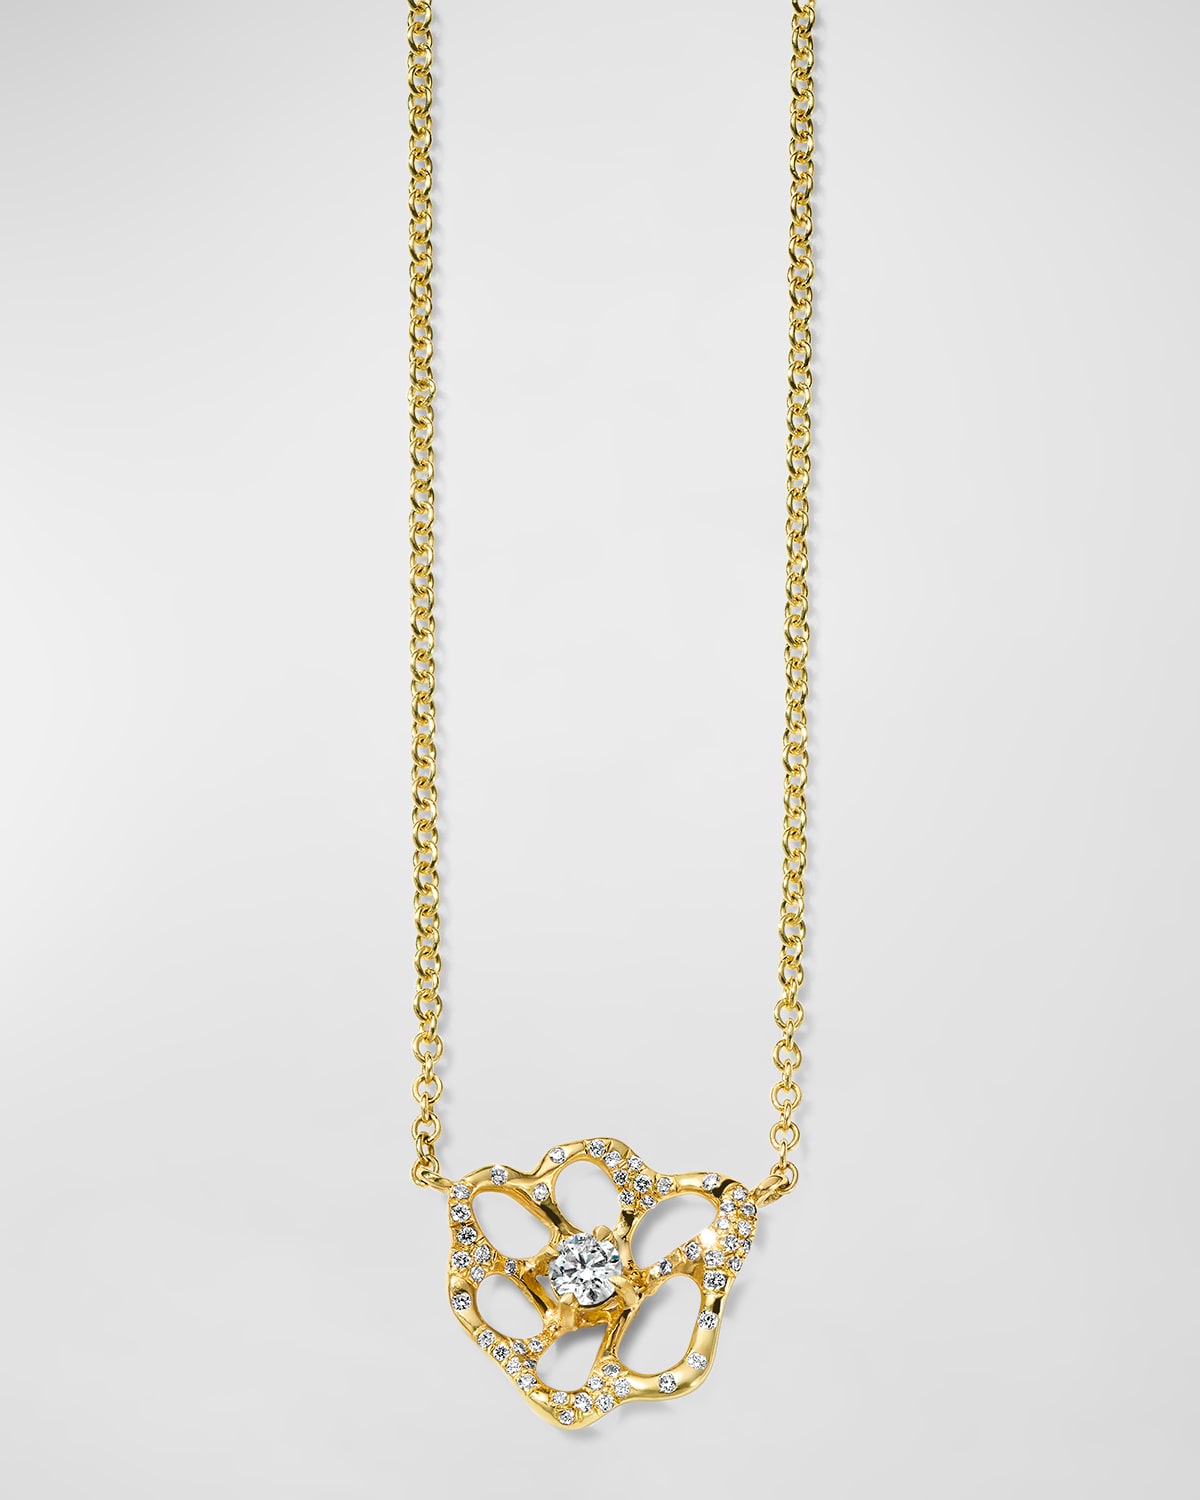 IPPOLITA 18K STARDUST DRIZZLE SMALL FLOWER NECKLACE WITH ROUND BRILLIANT-CUT DIAMONDS